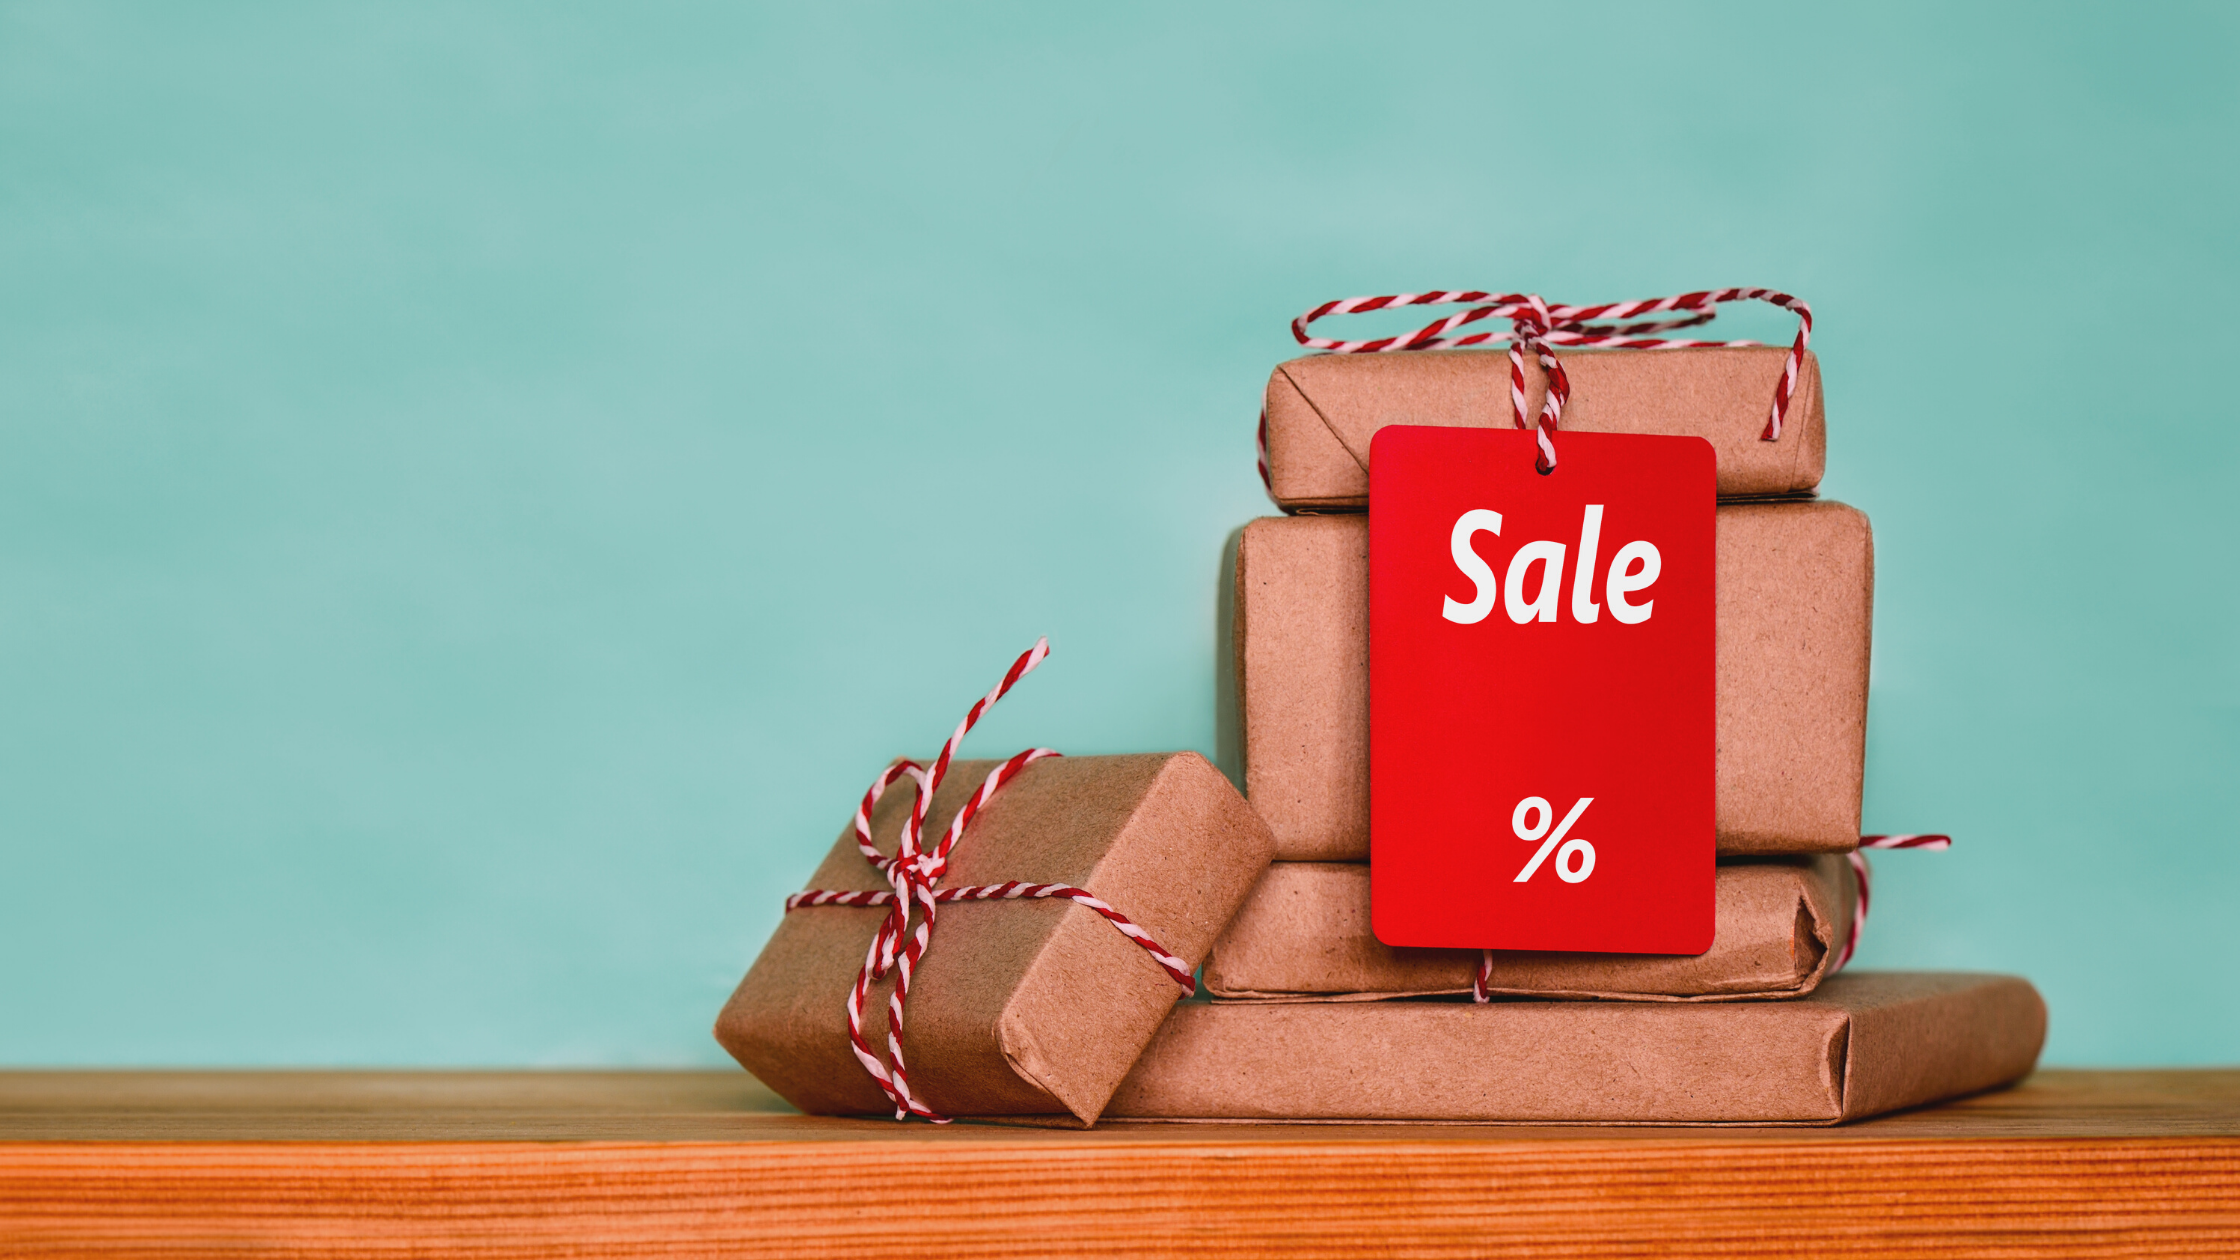 Prepping for Amazon Holiday Sales: The 2021 Seller’s Guide for Q4